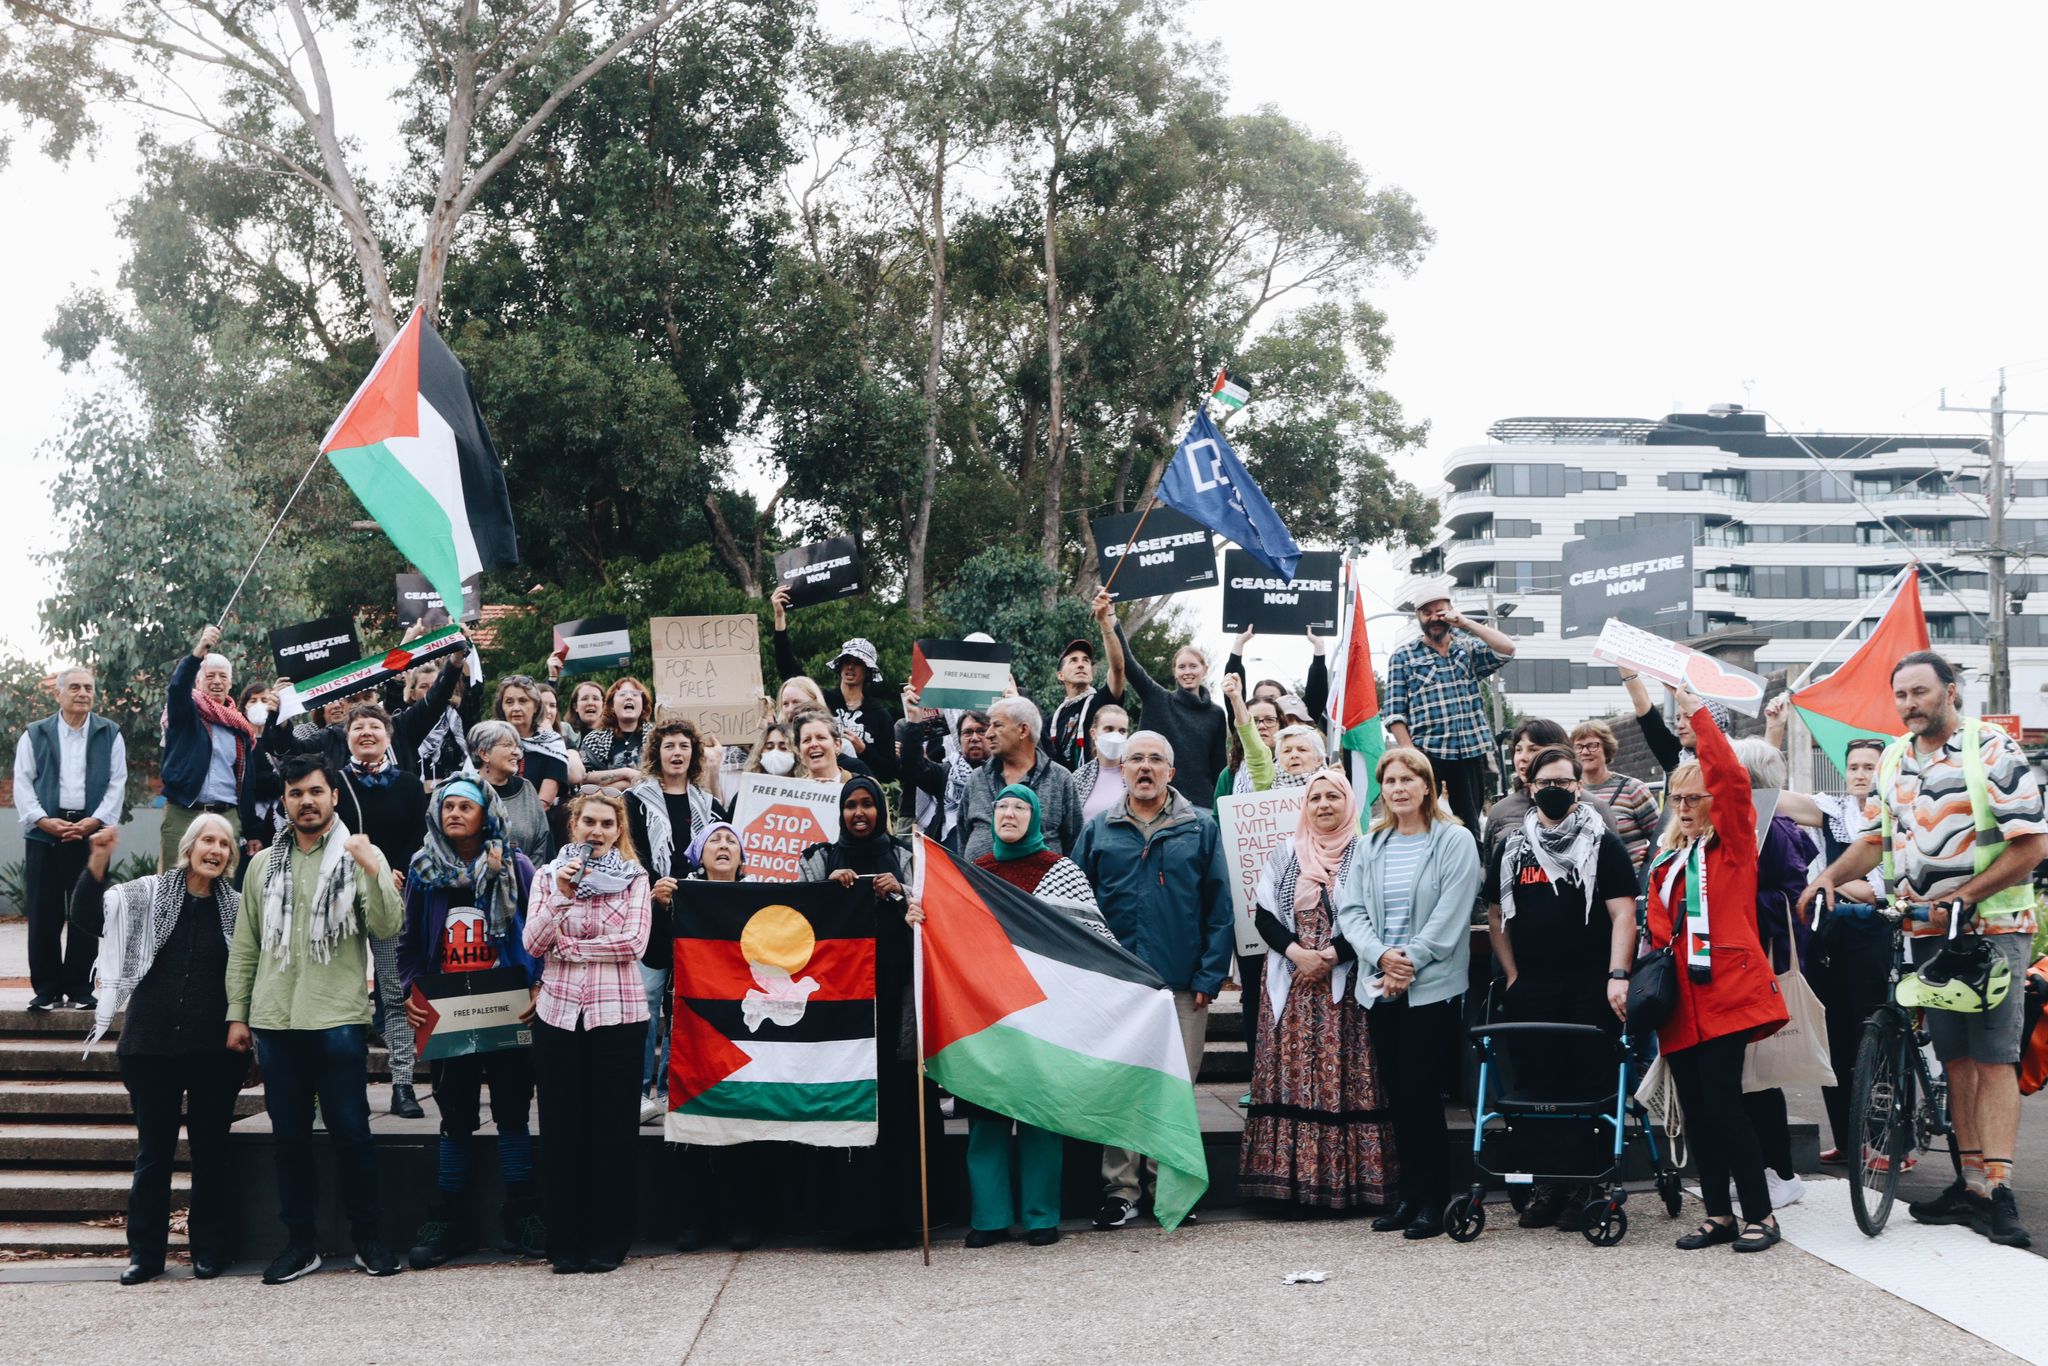 Palestine supporters at the Merri-bek Council meeting, March 13